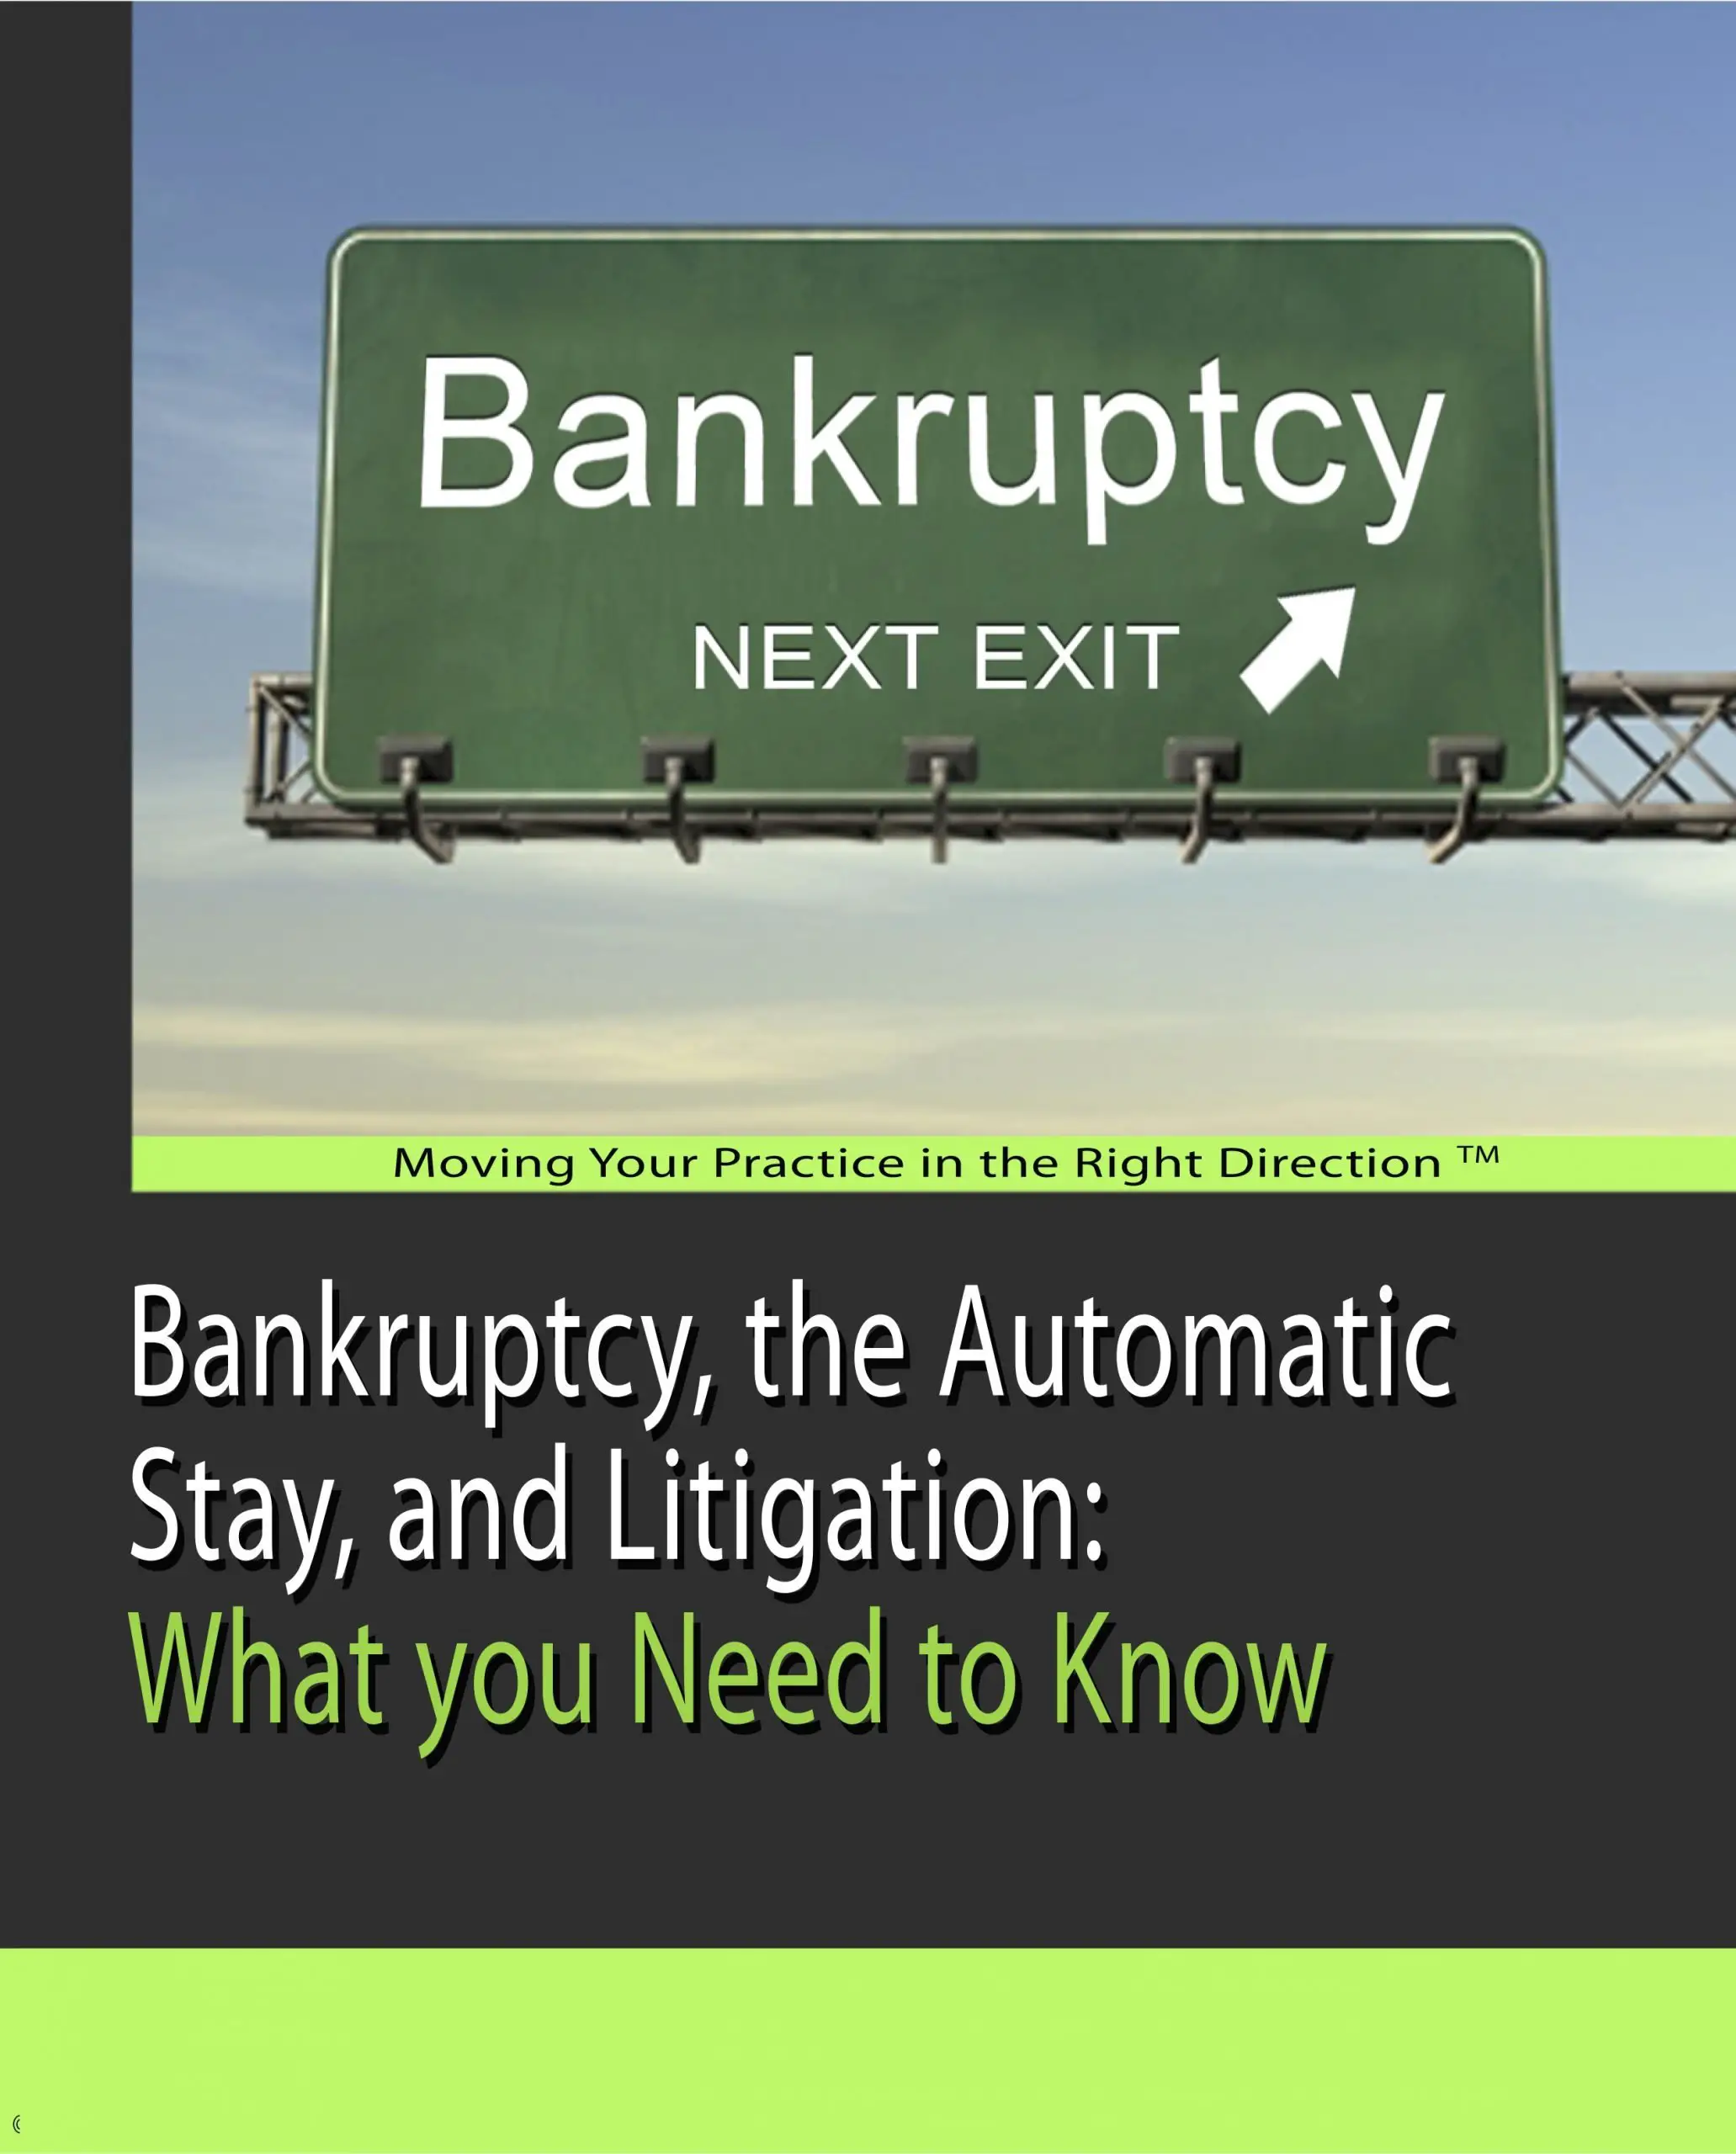 Bankruptcy, the Automatic Stay, and Litigation